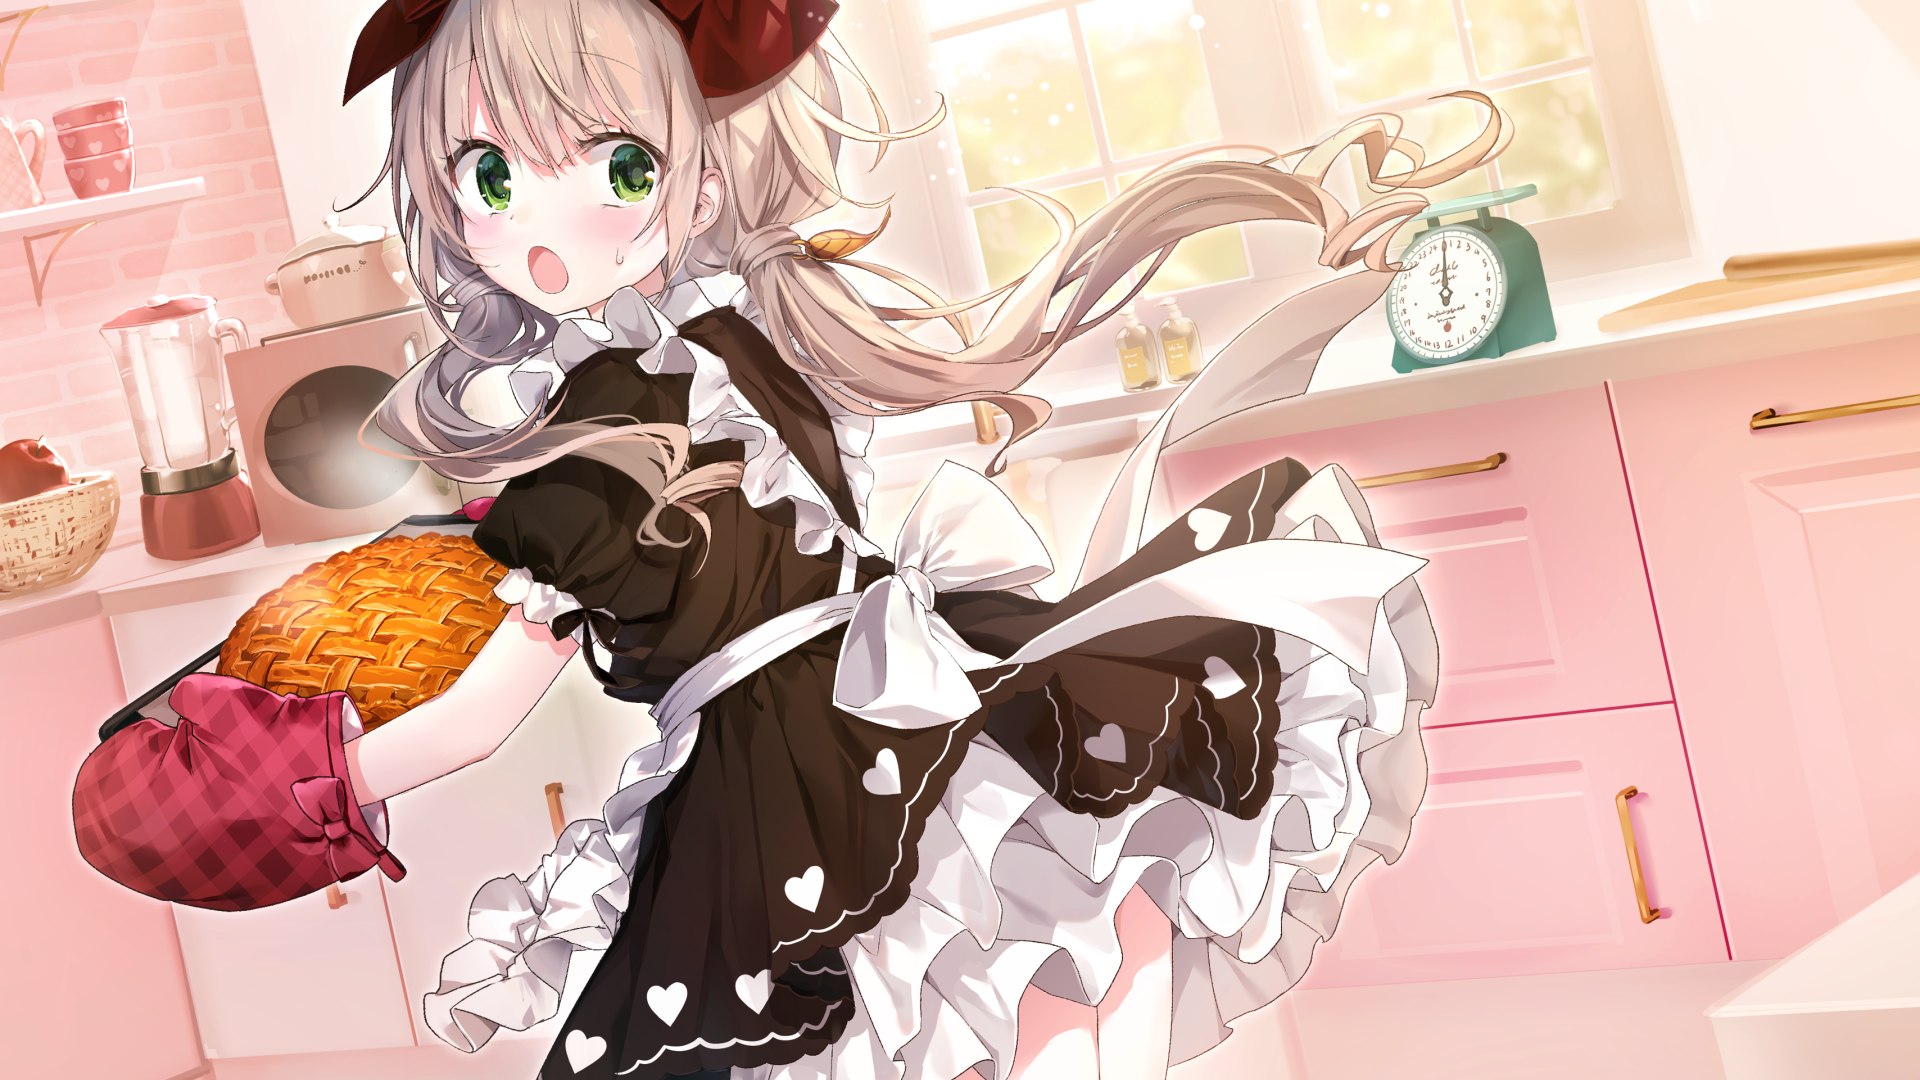 Anime girl in the kitchen with pie